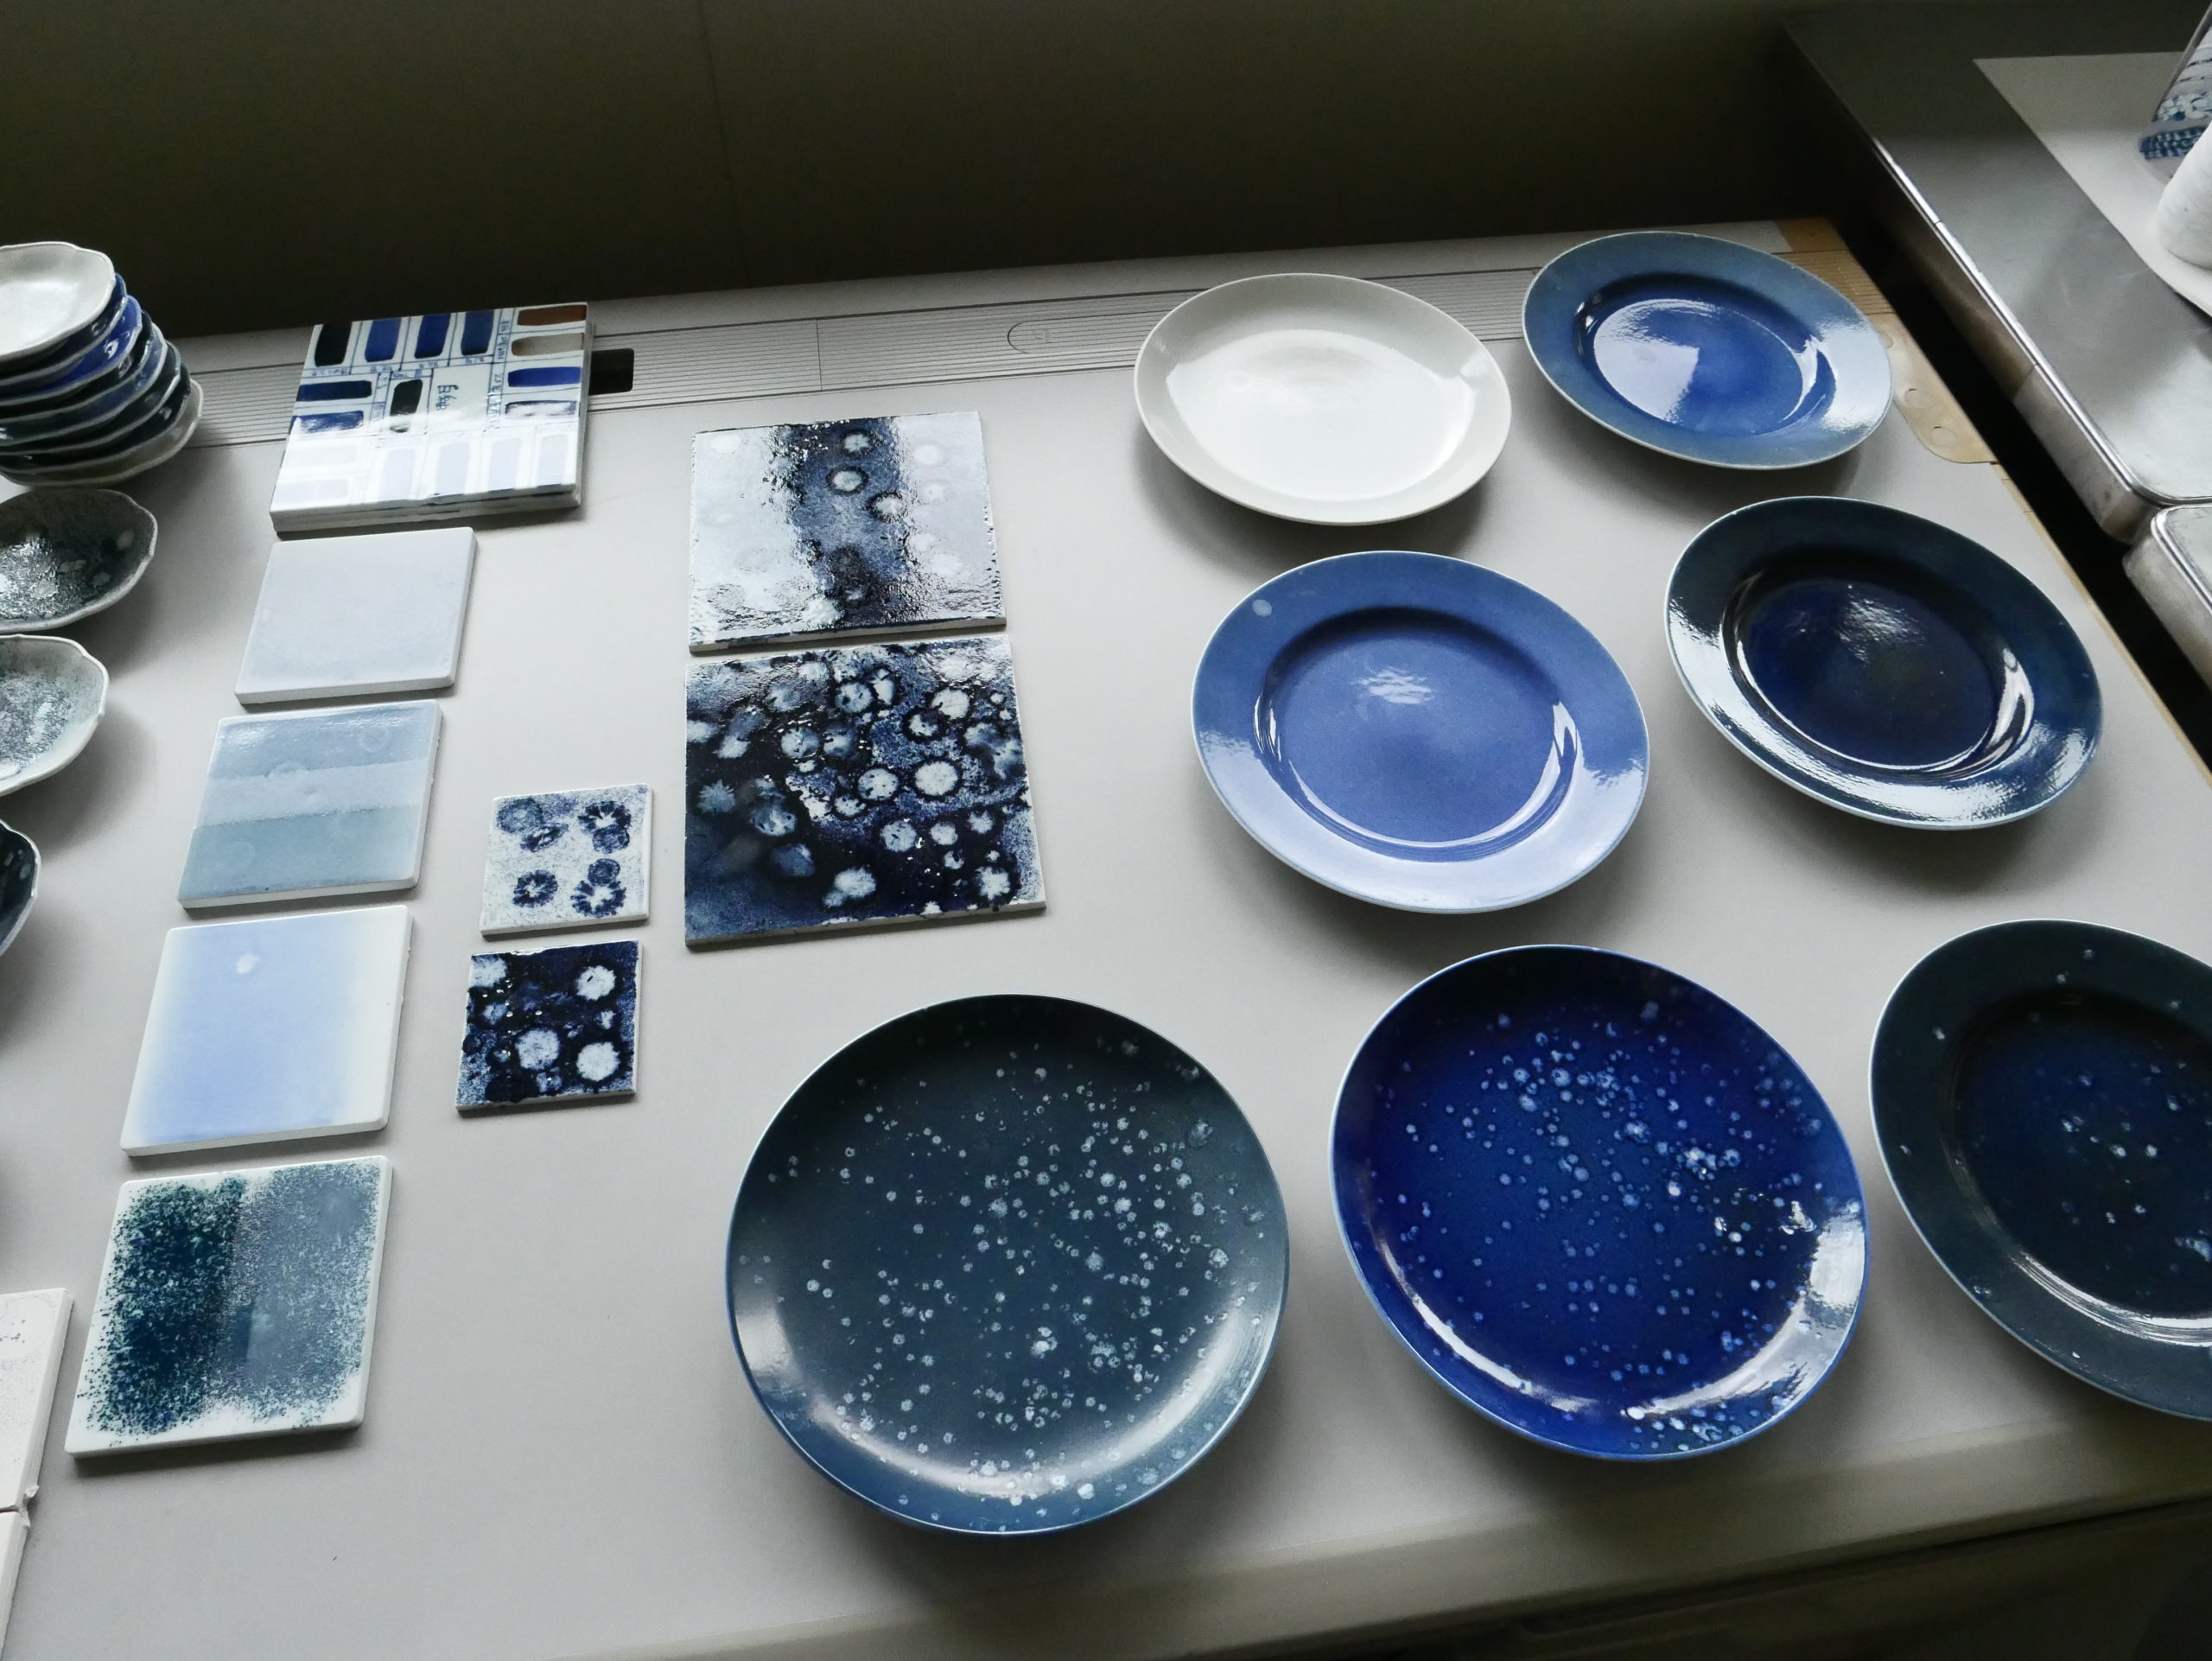 An array of porcelain plates and sample material squares in blue tones ranging from deep navy to light blue to blue-green. These materials are faintly speckled with white dots in an irregular pattern, evoking the pattern formed by fallen raindrops.